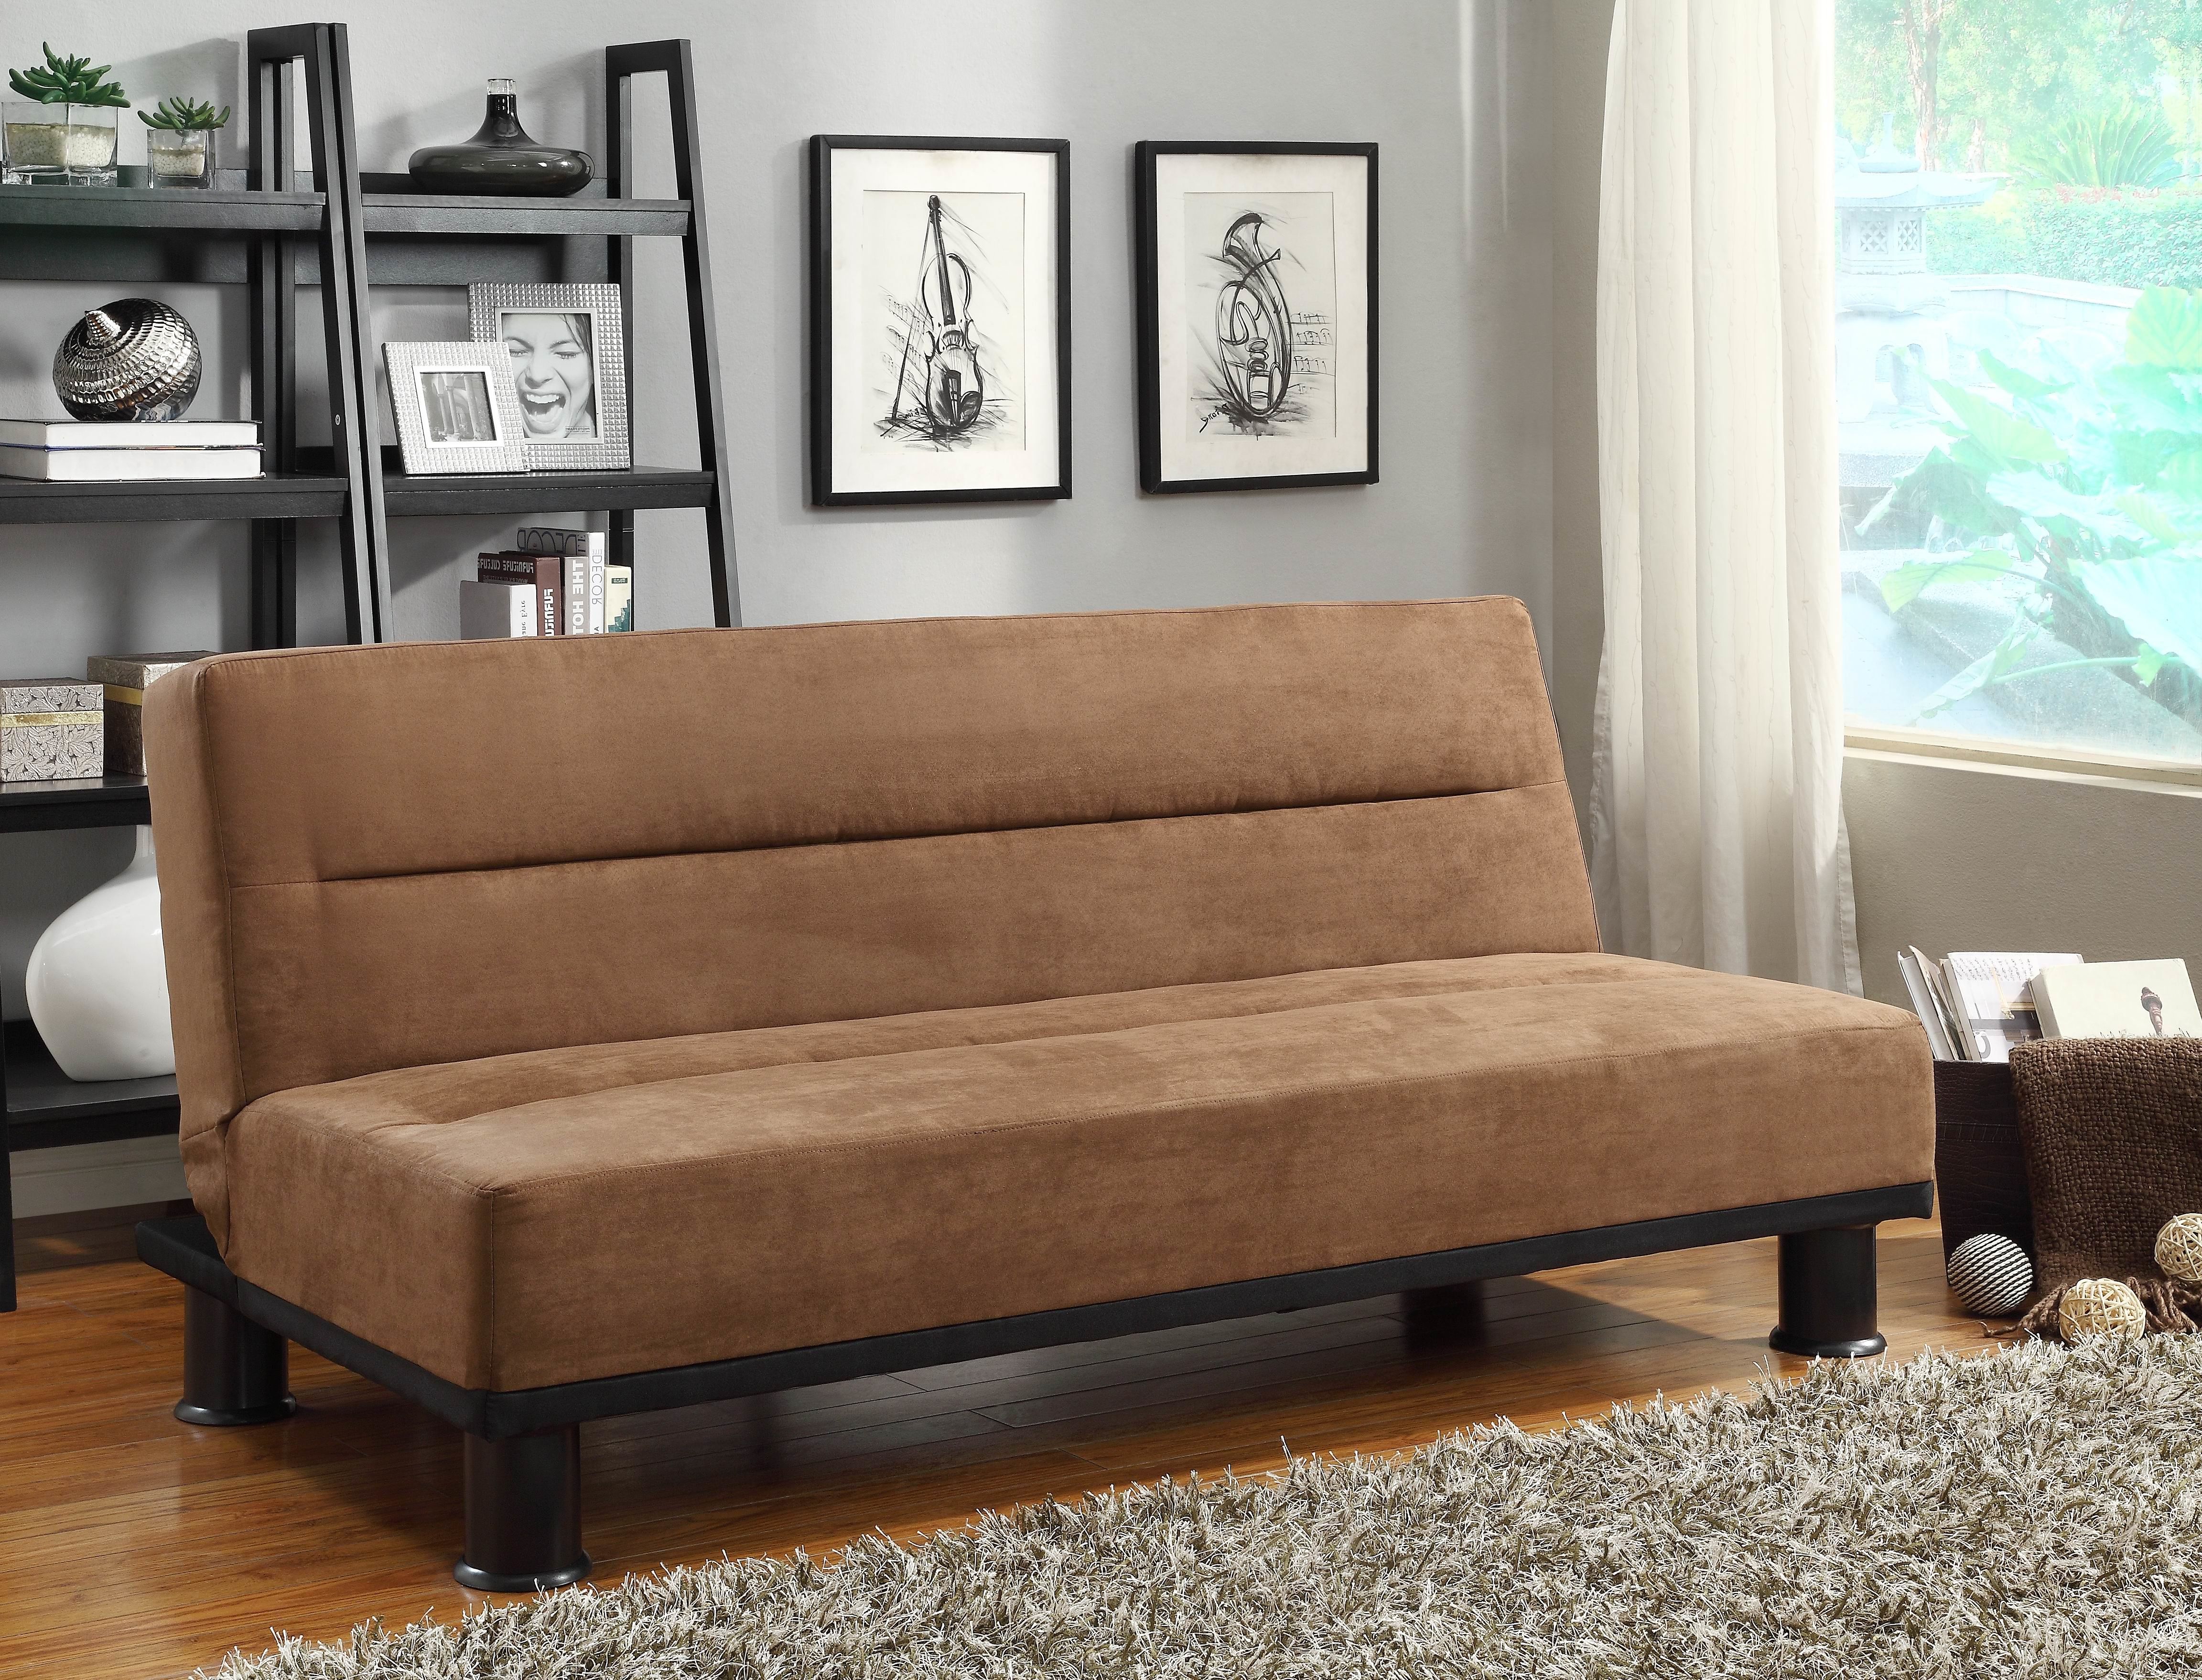 Popular Callie Sofa Chairs Intended For Woodhaven Hill Callie Convertible Sofa & Reviews (View 20 of 20)